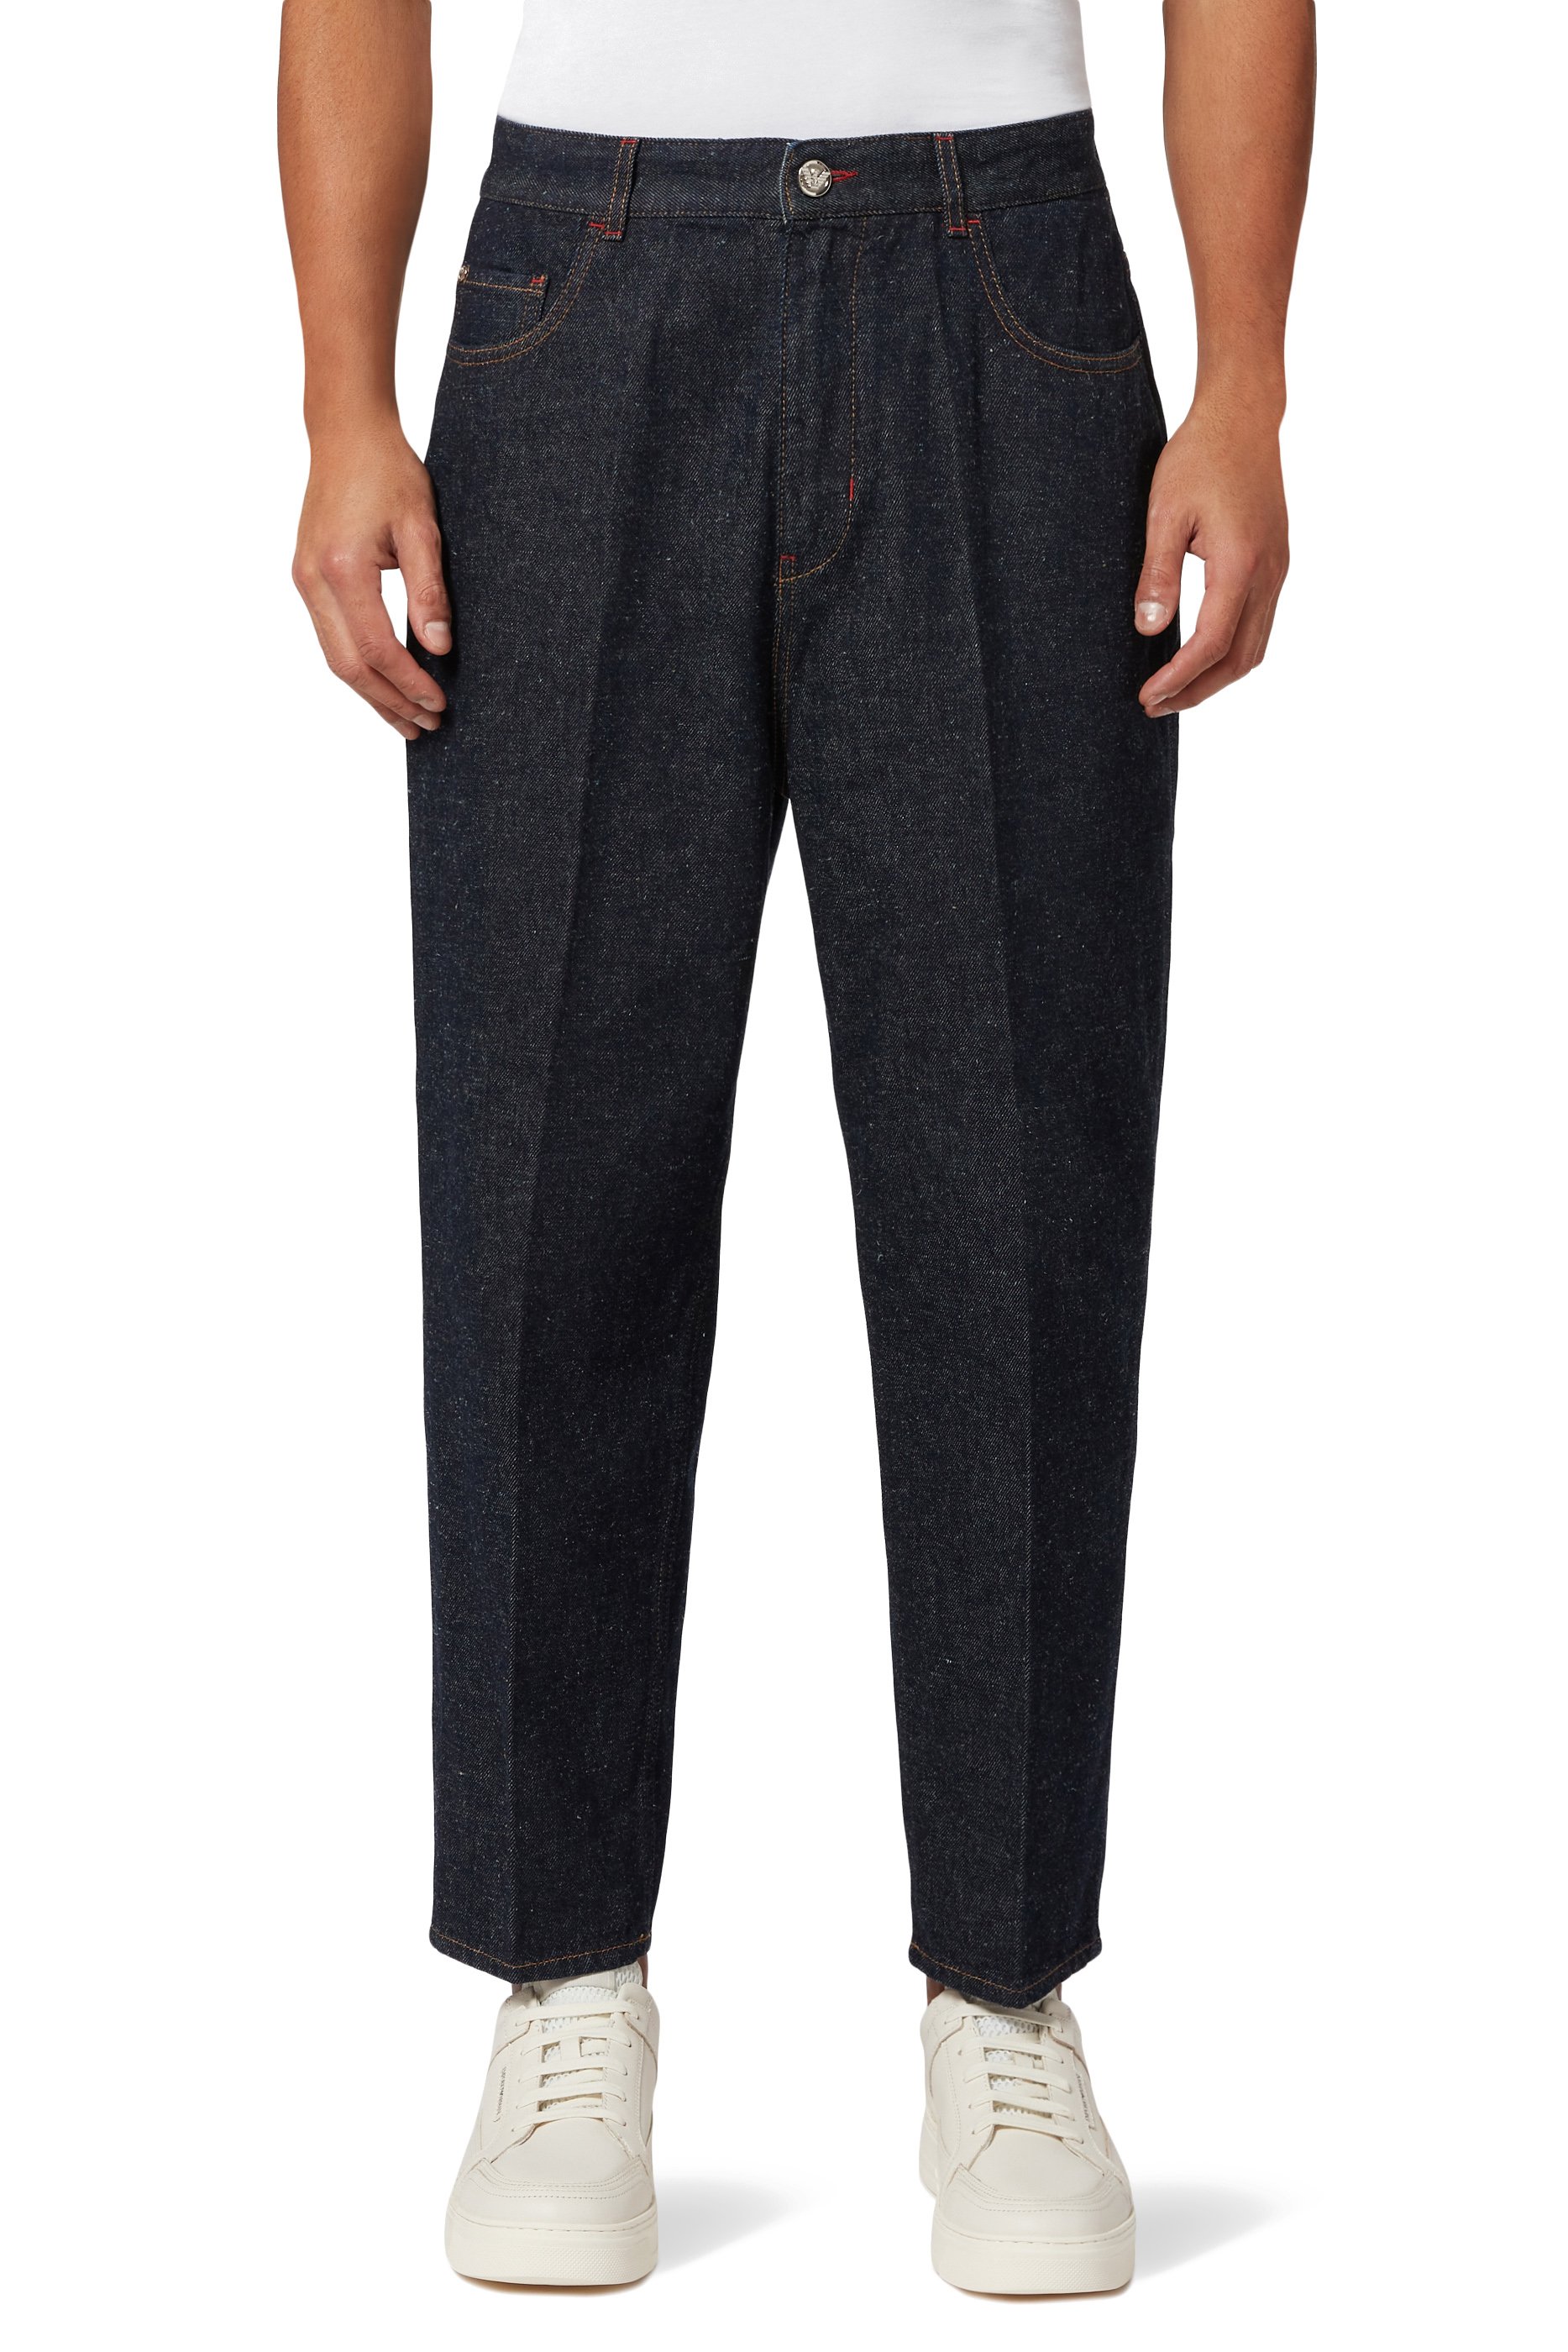 Buy Emporio Armani J79 Tapered-leg Jeans for Mens | Bloomingdale's Kuwait